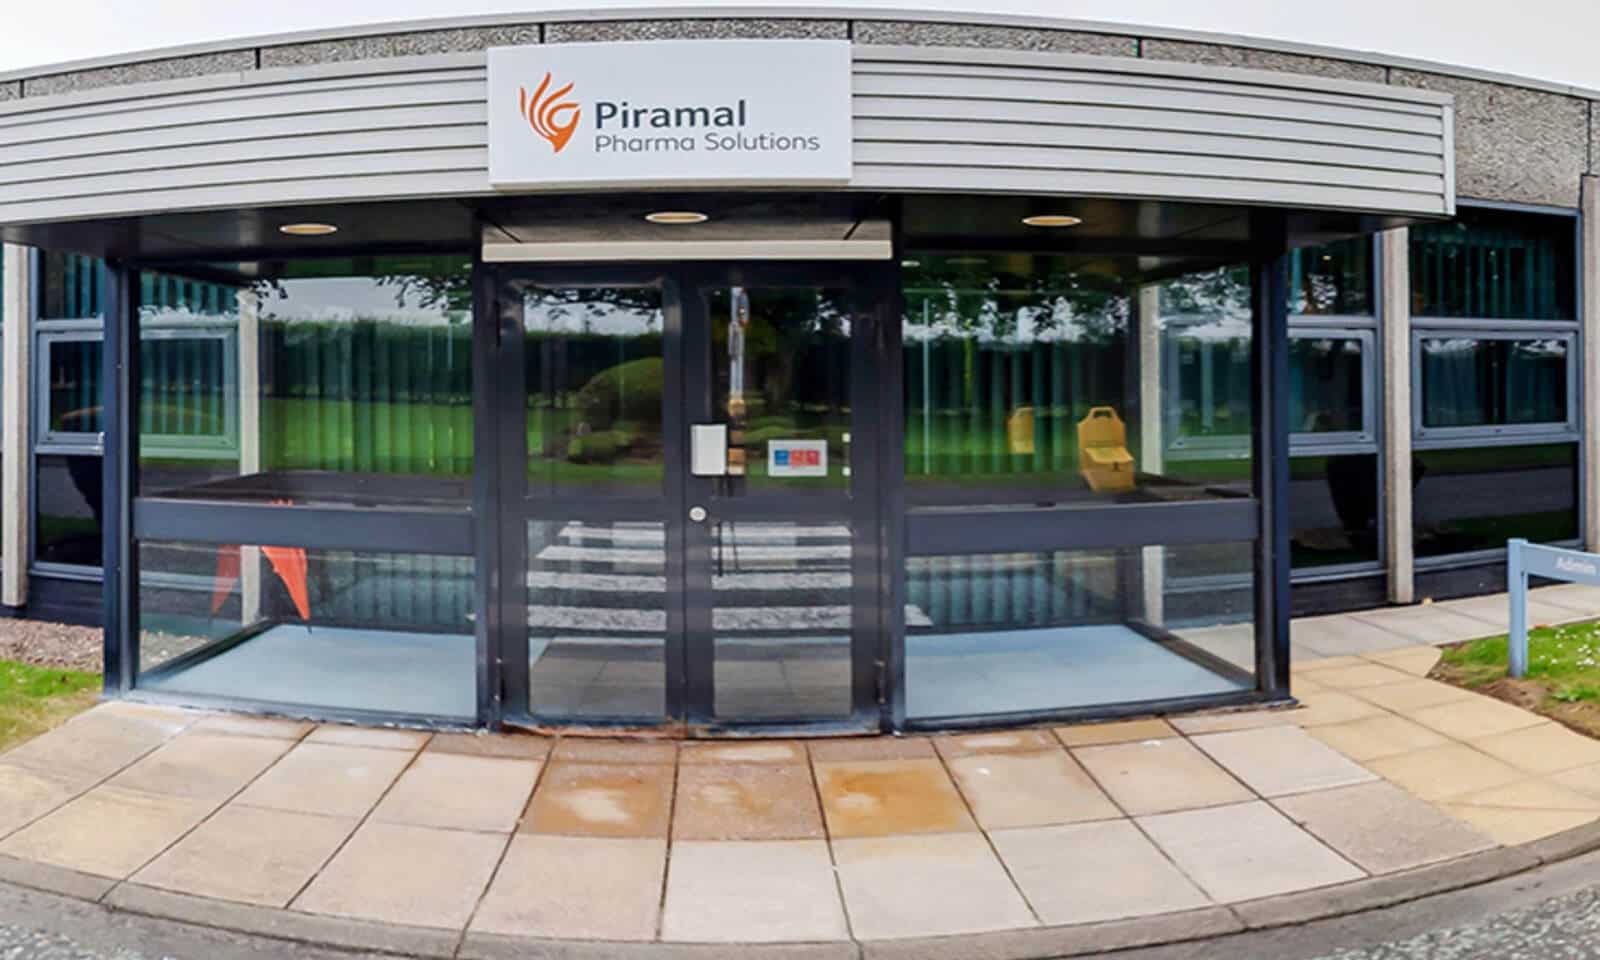 Piramal Pharma To List Shares On October 19, Watch All Details About The Listing In This Video